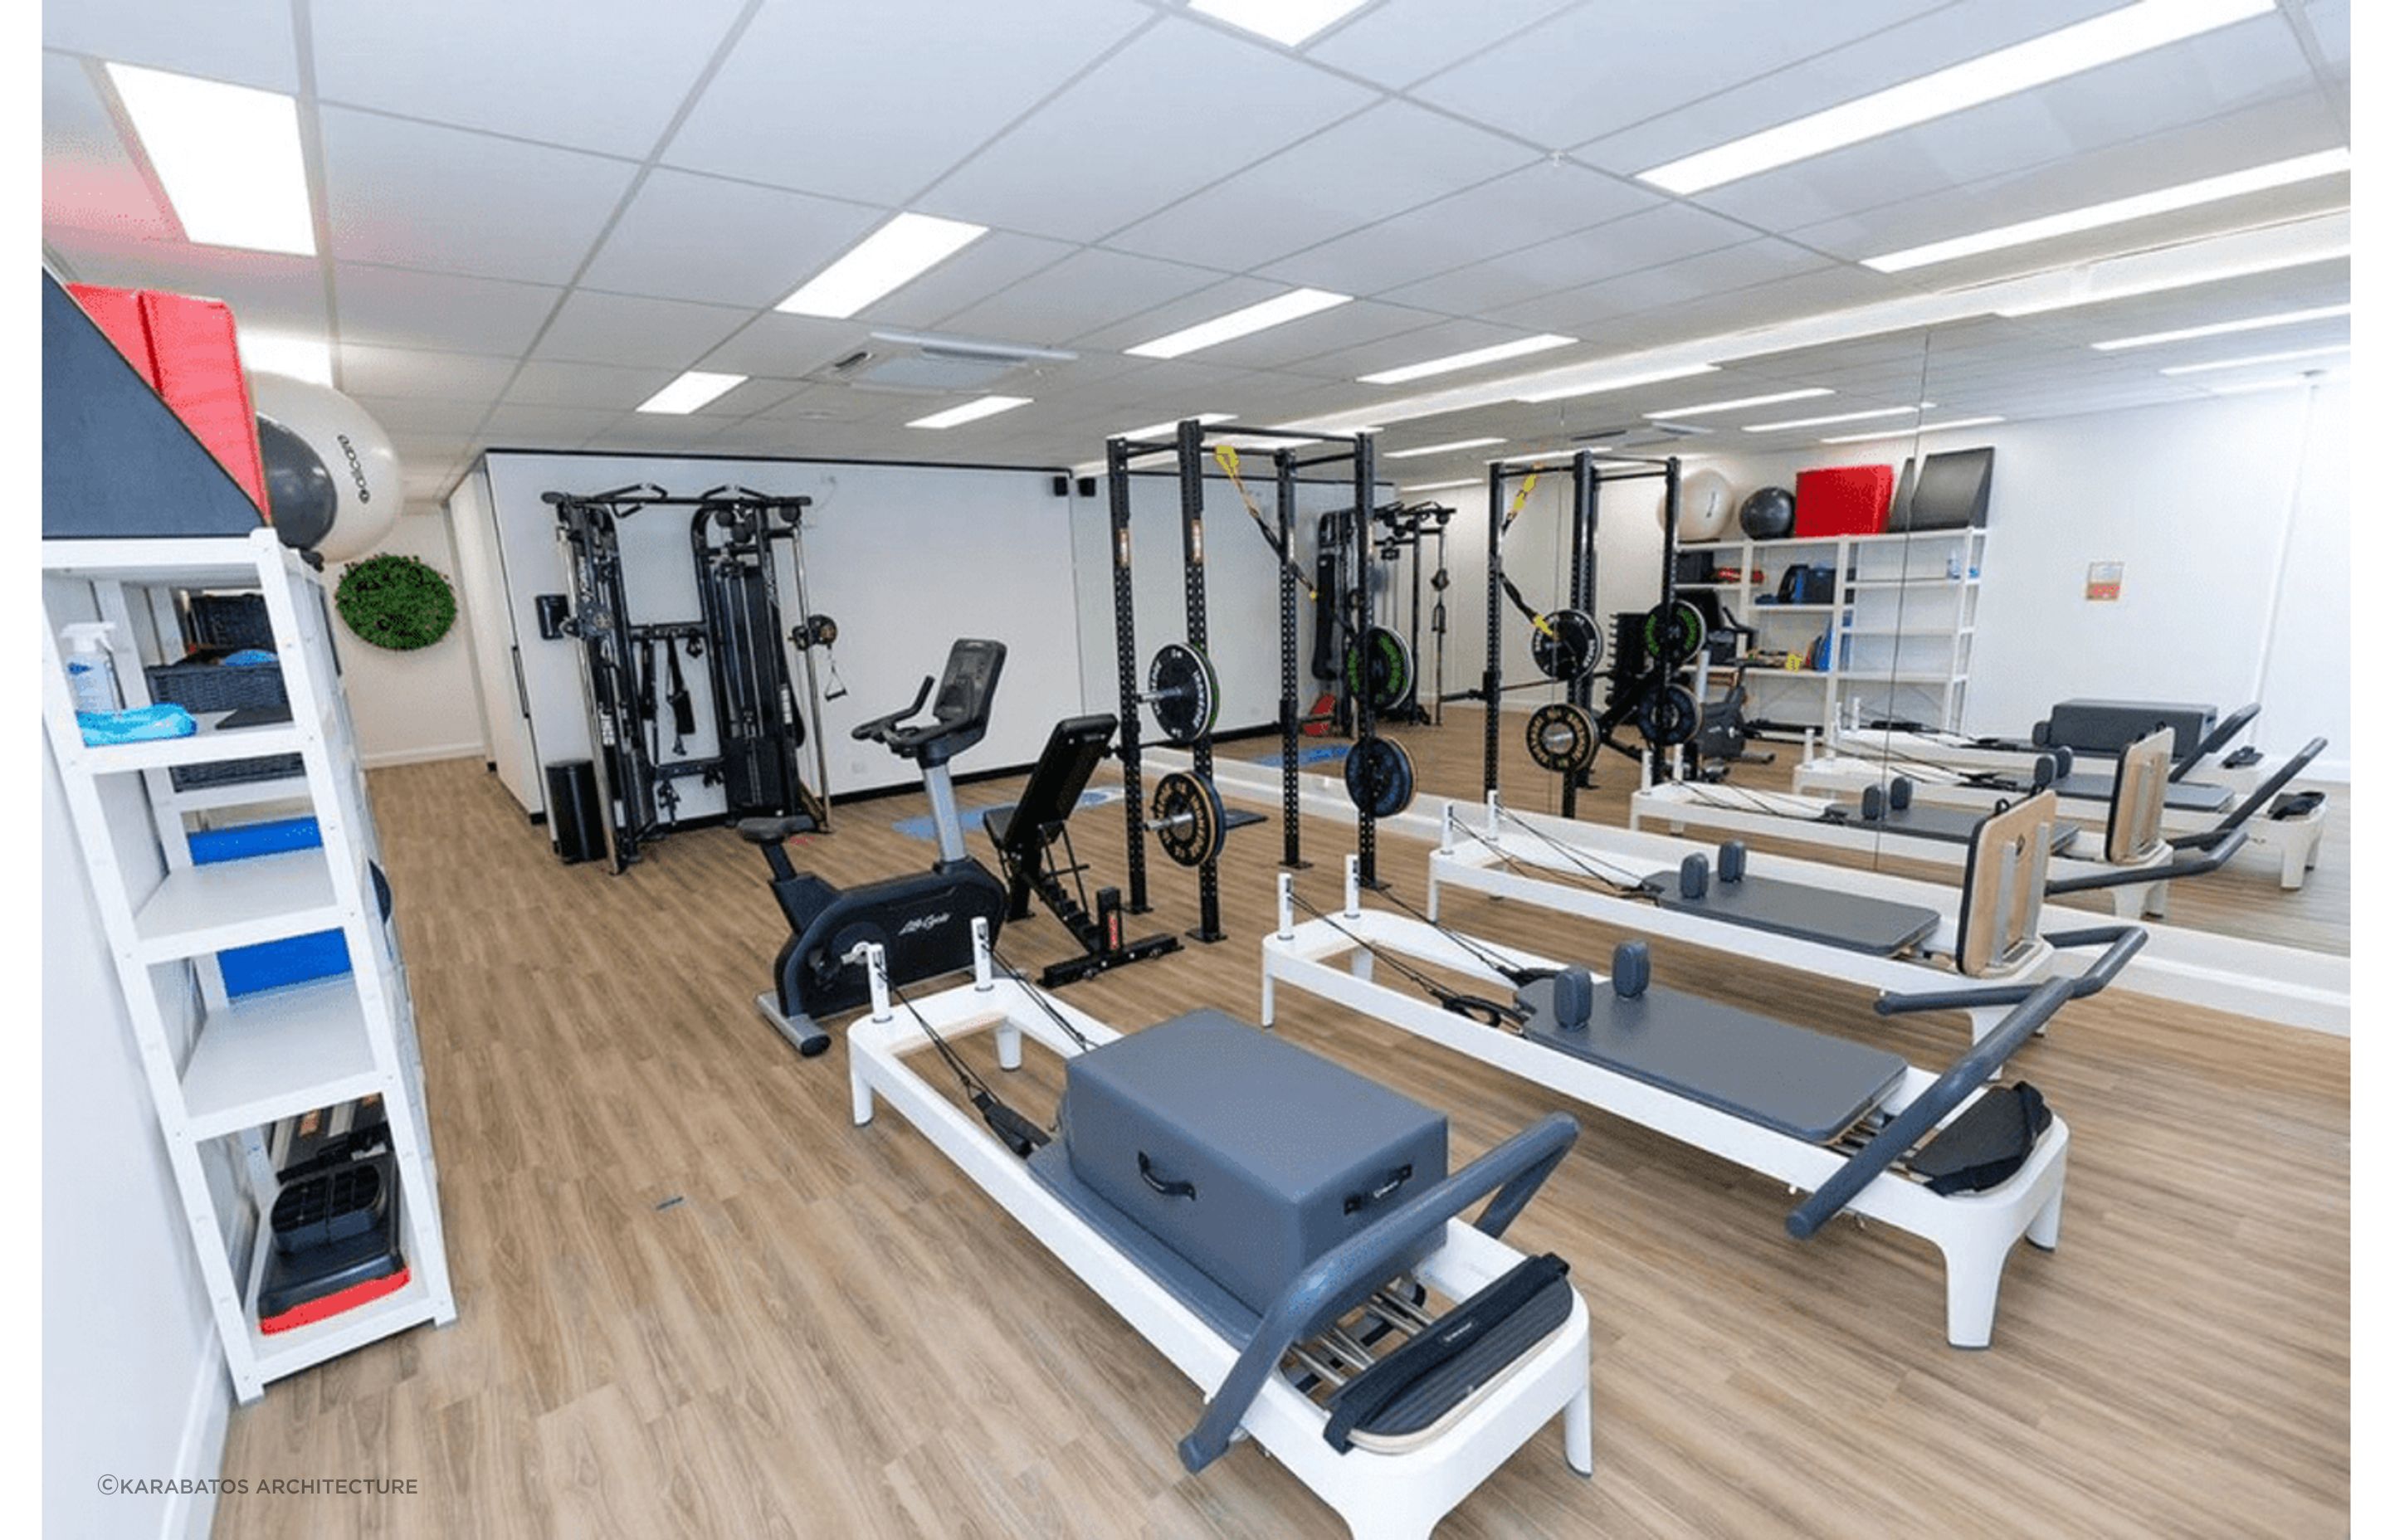 Hybrid flooring, particularly SPC flooring is a popular choice for gyms and fitness centres.